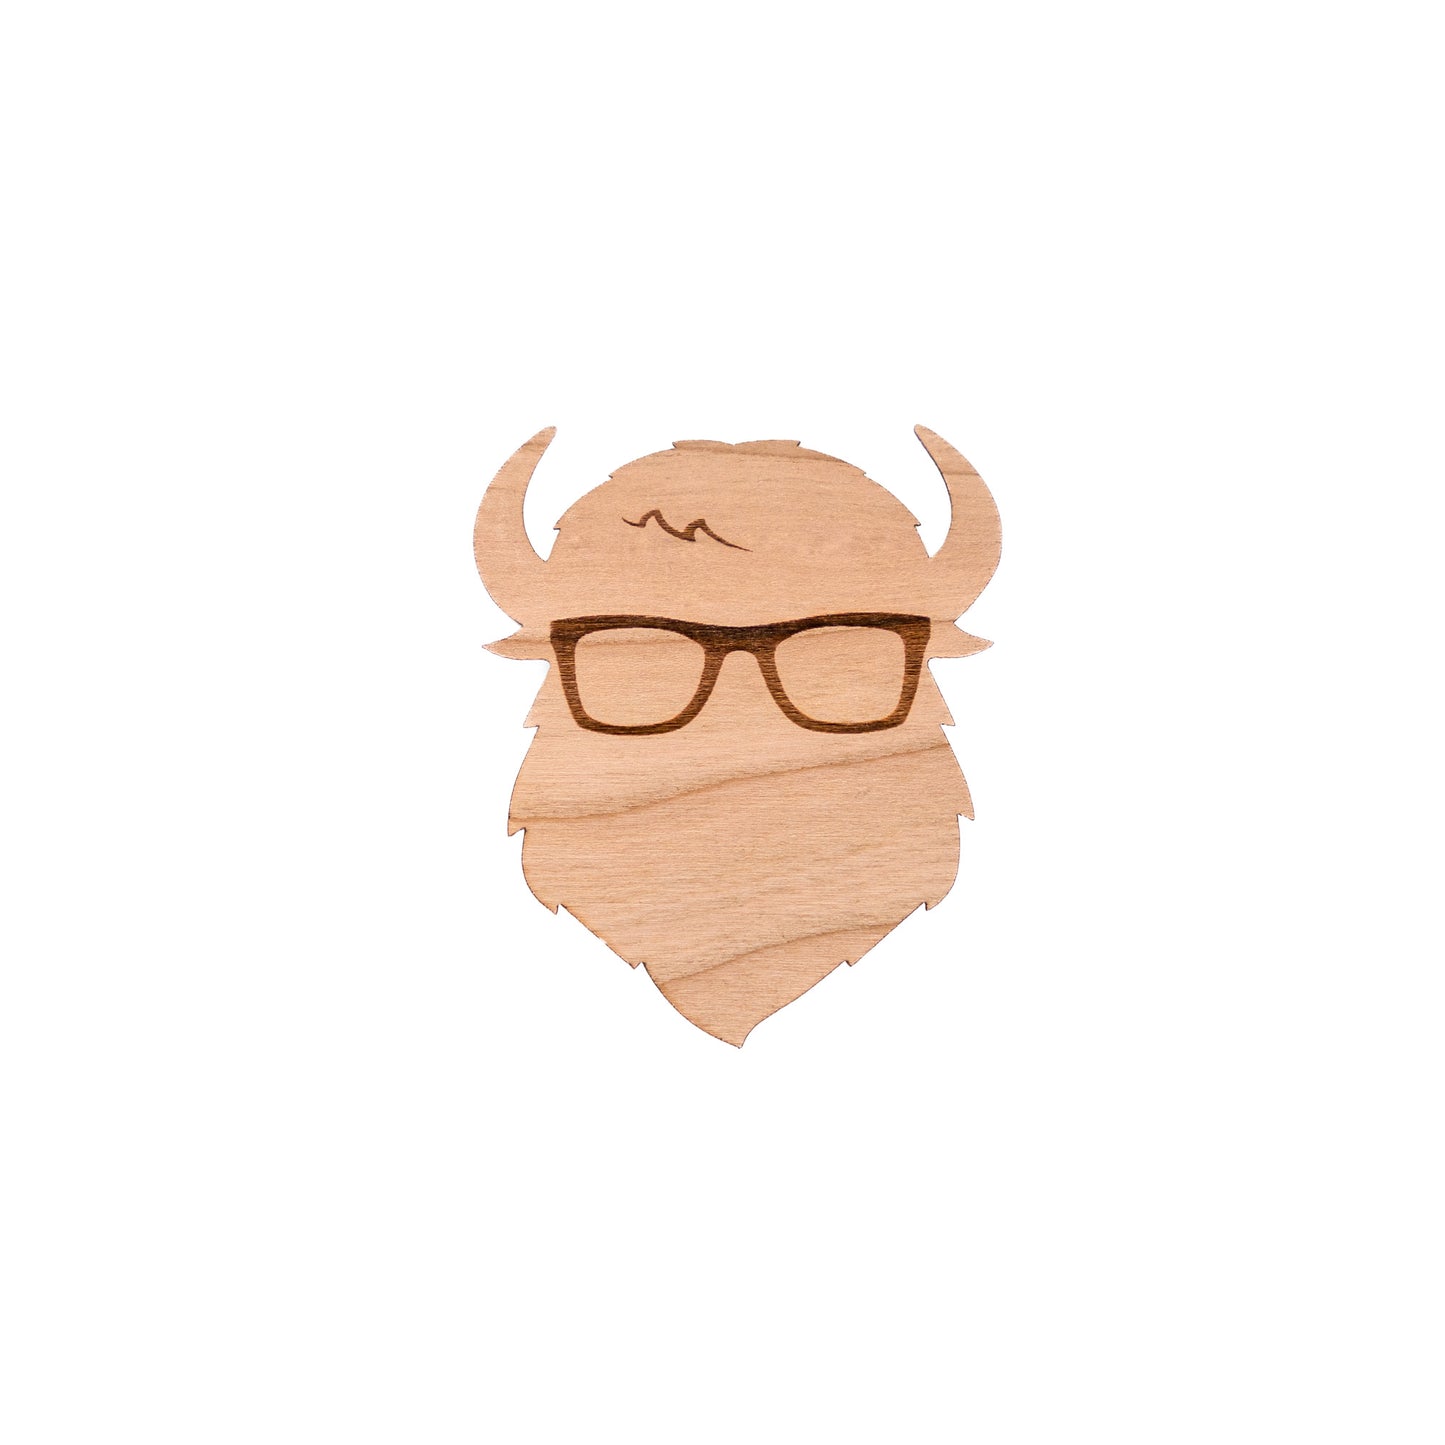 The Curious Bison Wood Sticker